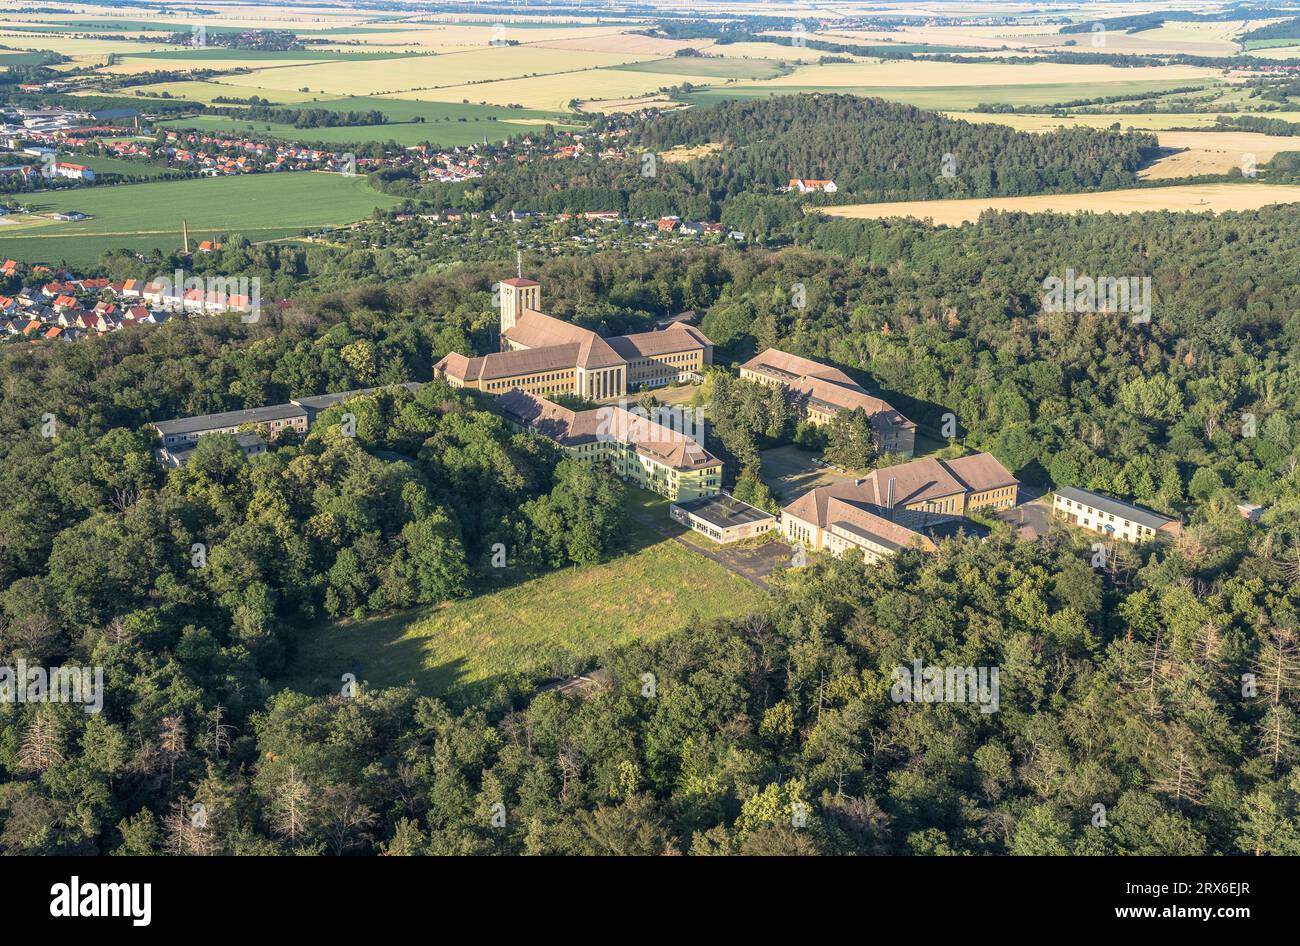 Germany, Saxony-Anhalt, Ballenstedt, Aerial view of Ziegenberg complex surrounded by green trees Stock Photo